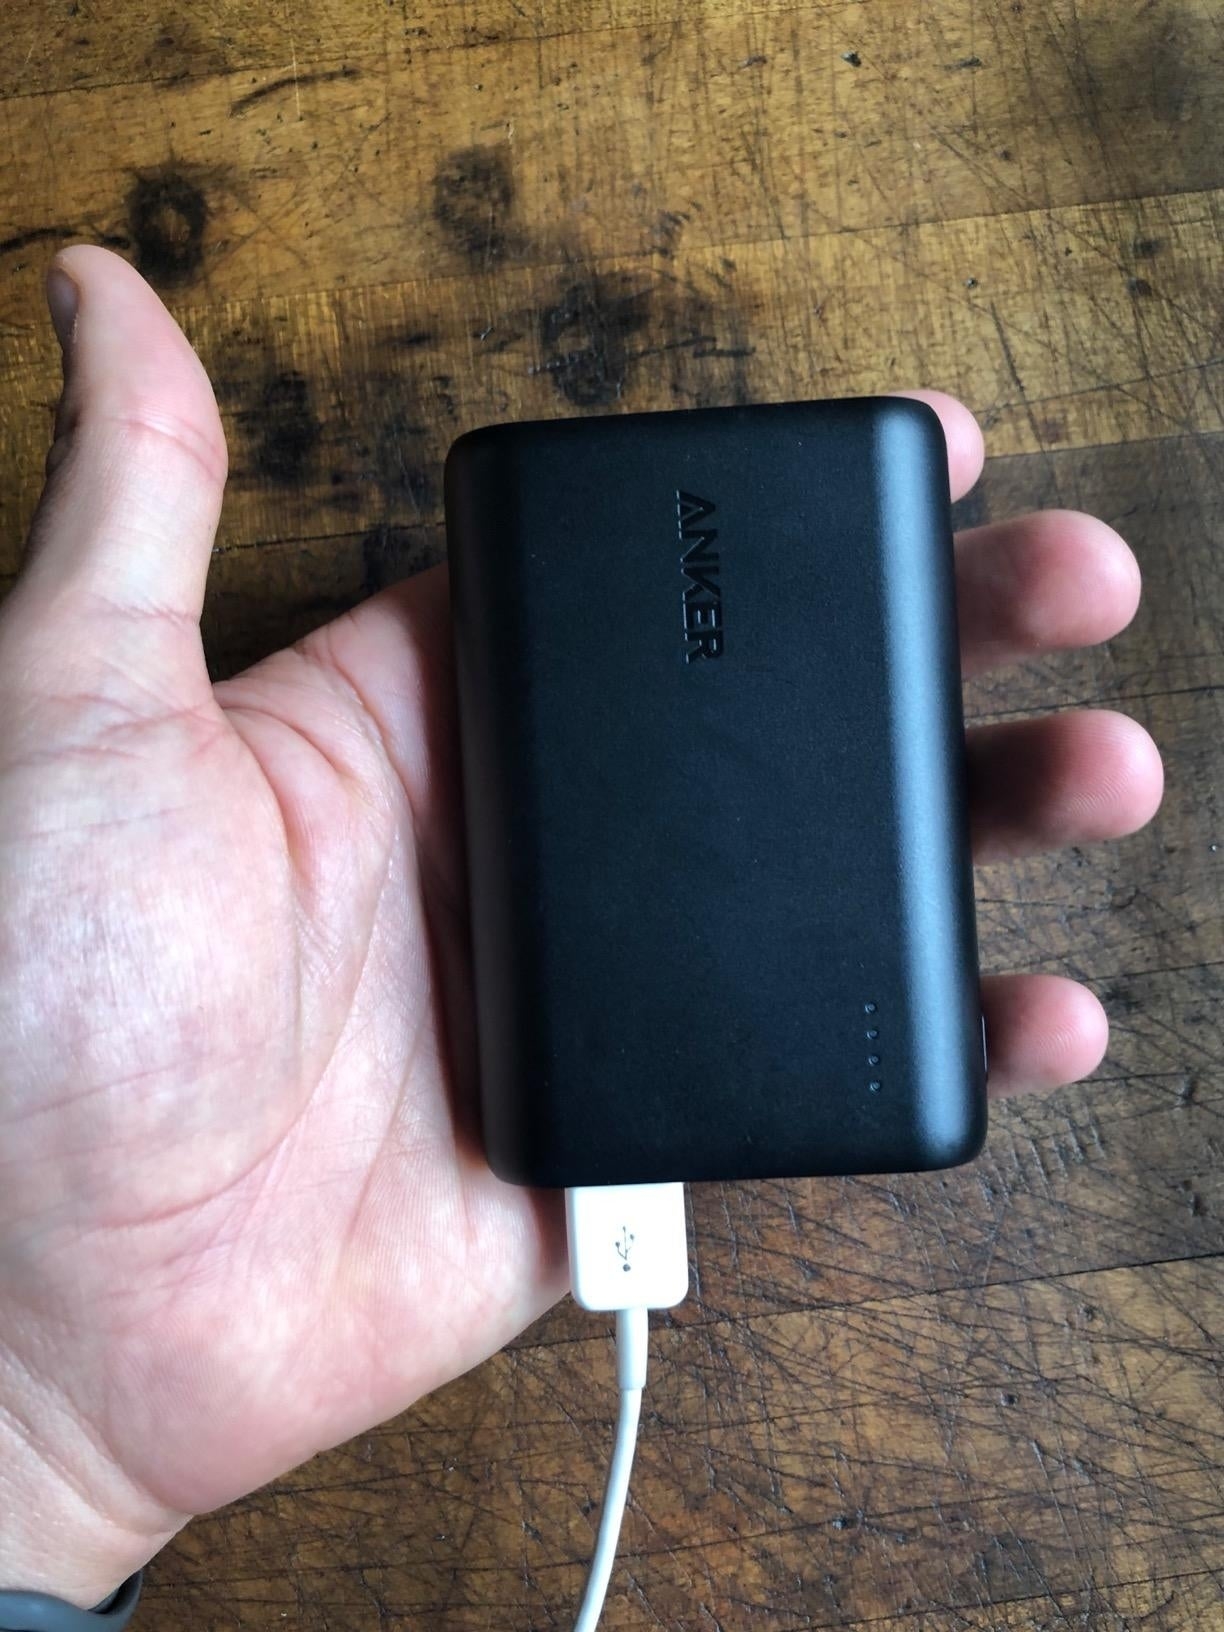 Hand holding a portable Anker power bank with a charging cable attached